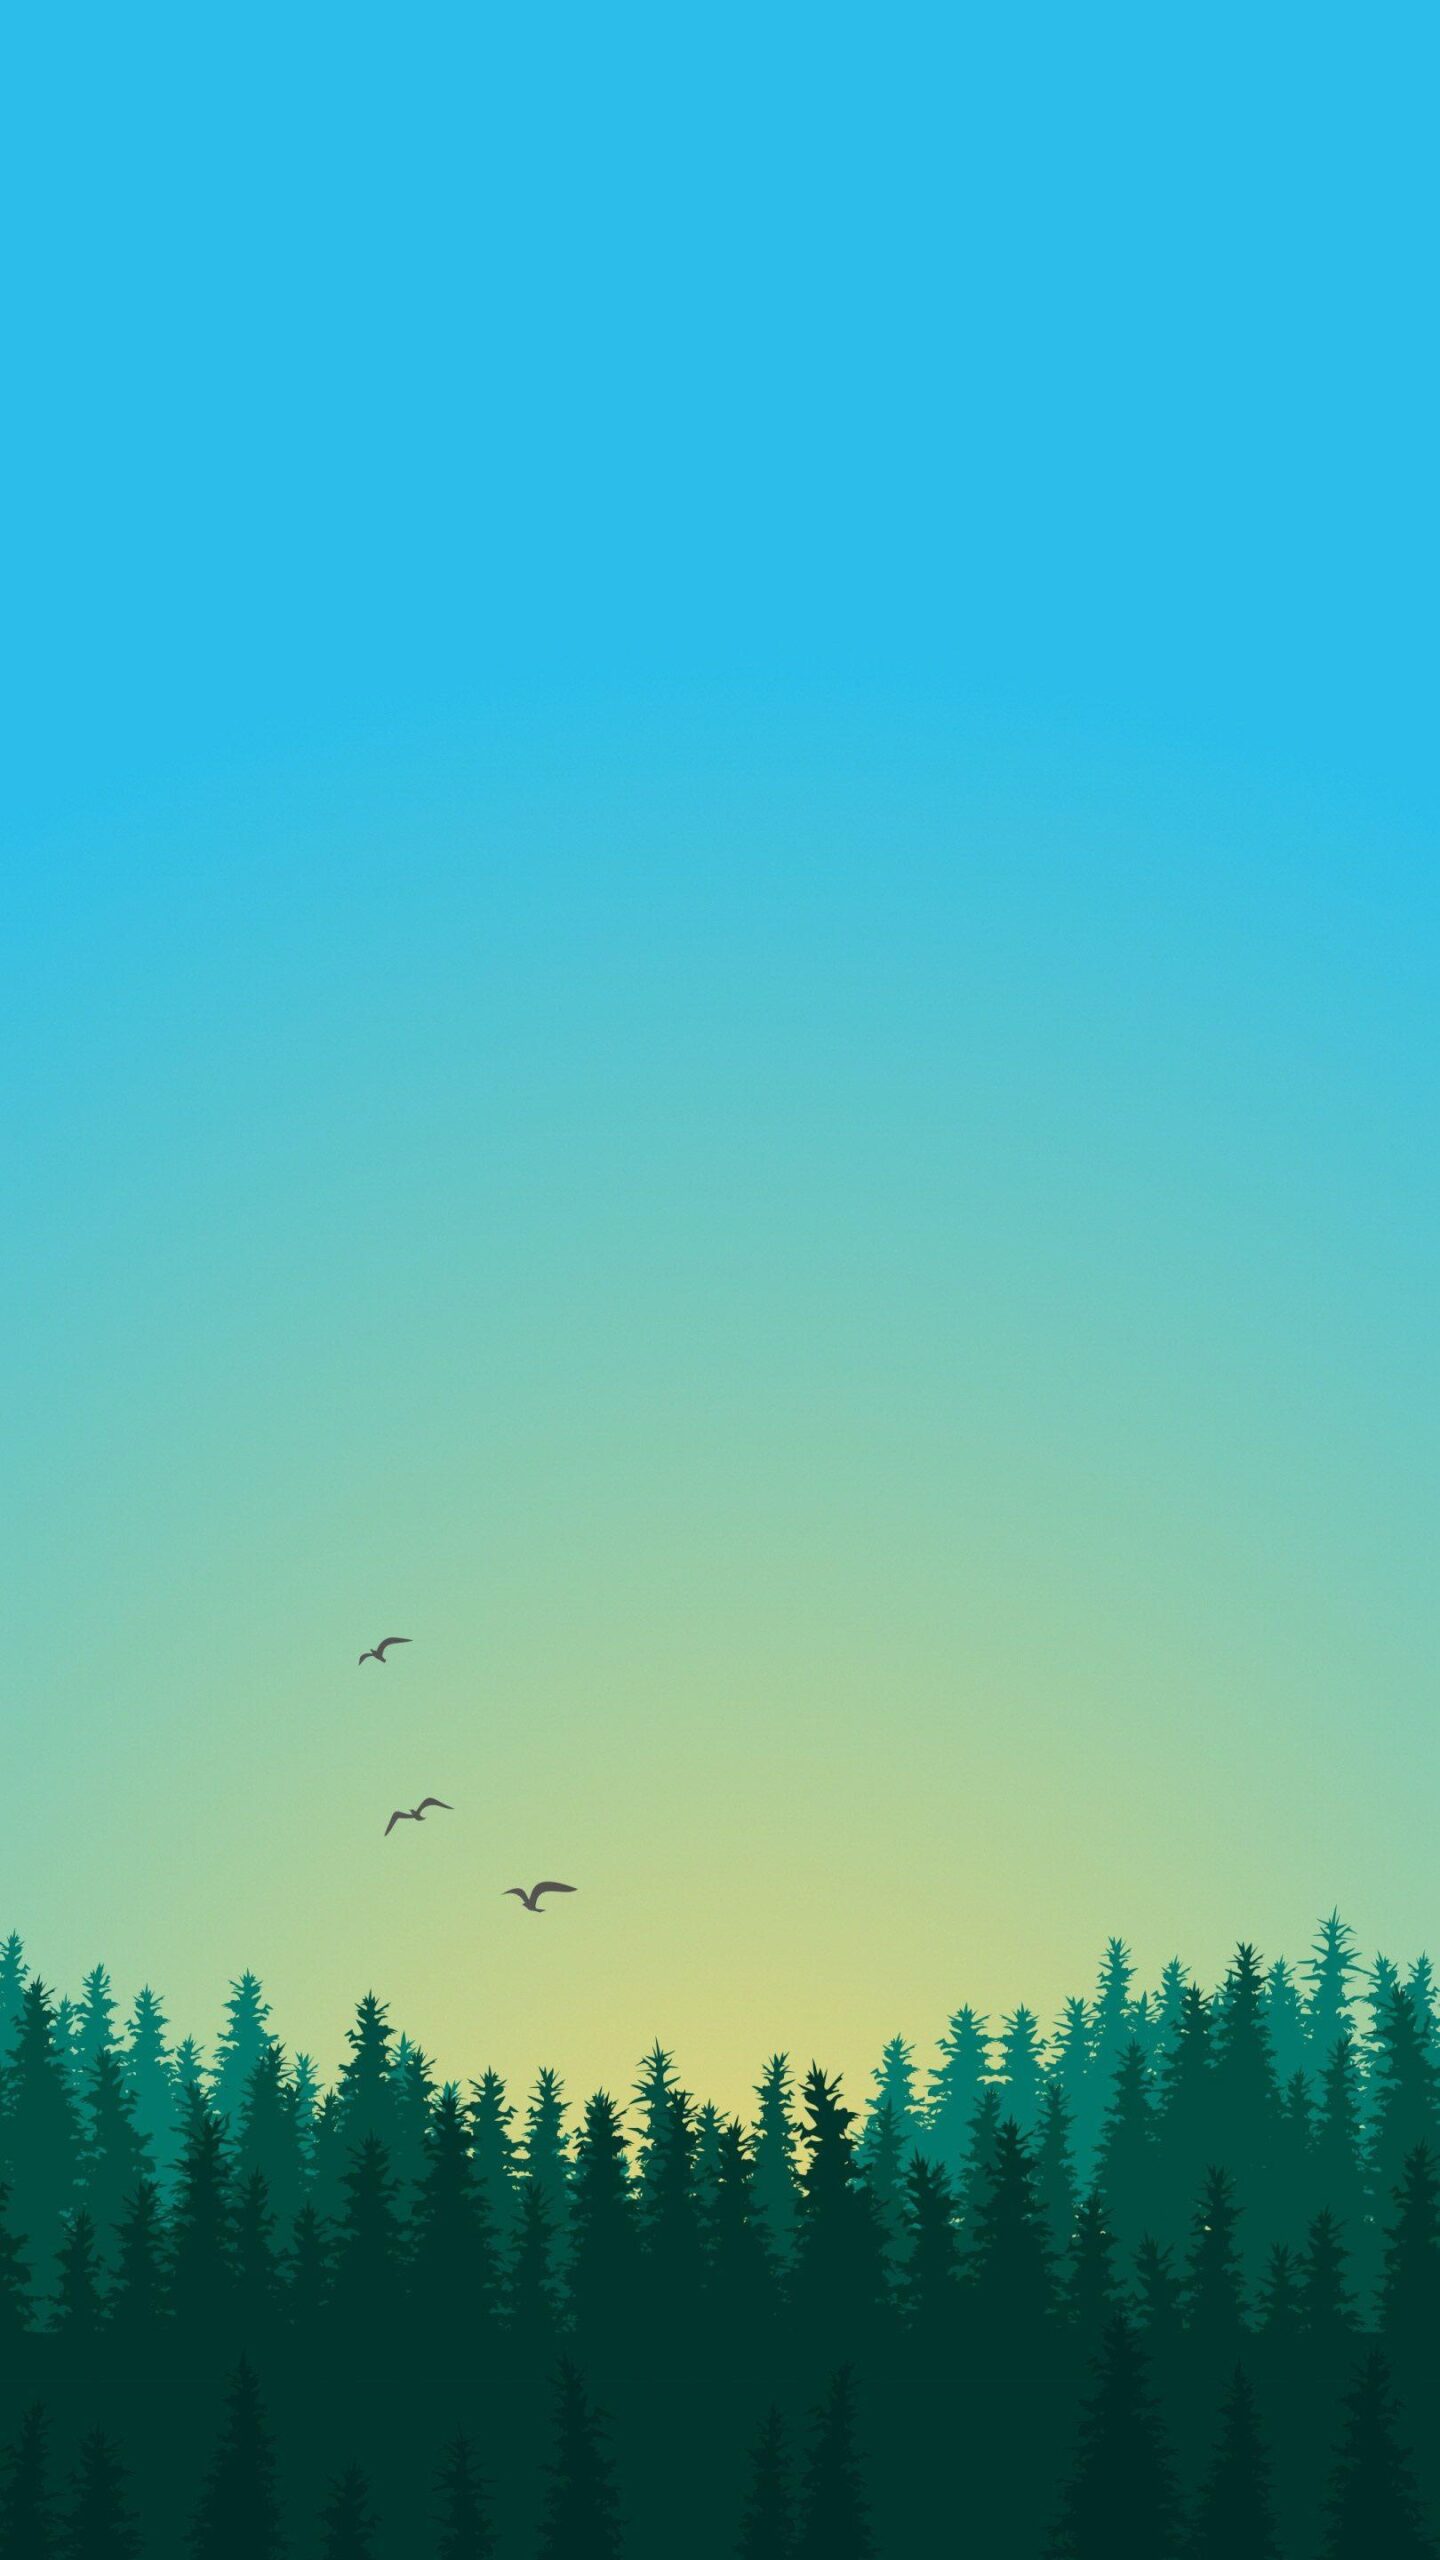 Download Minimalist Wallpapers in QHD Quality